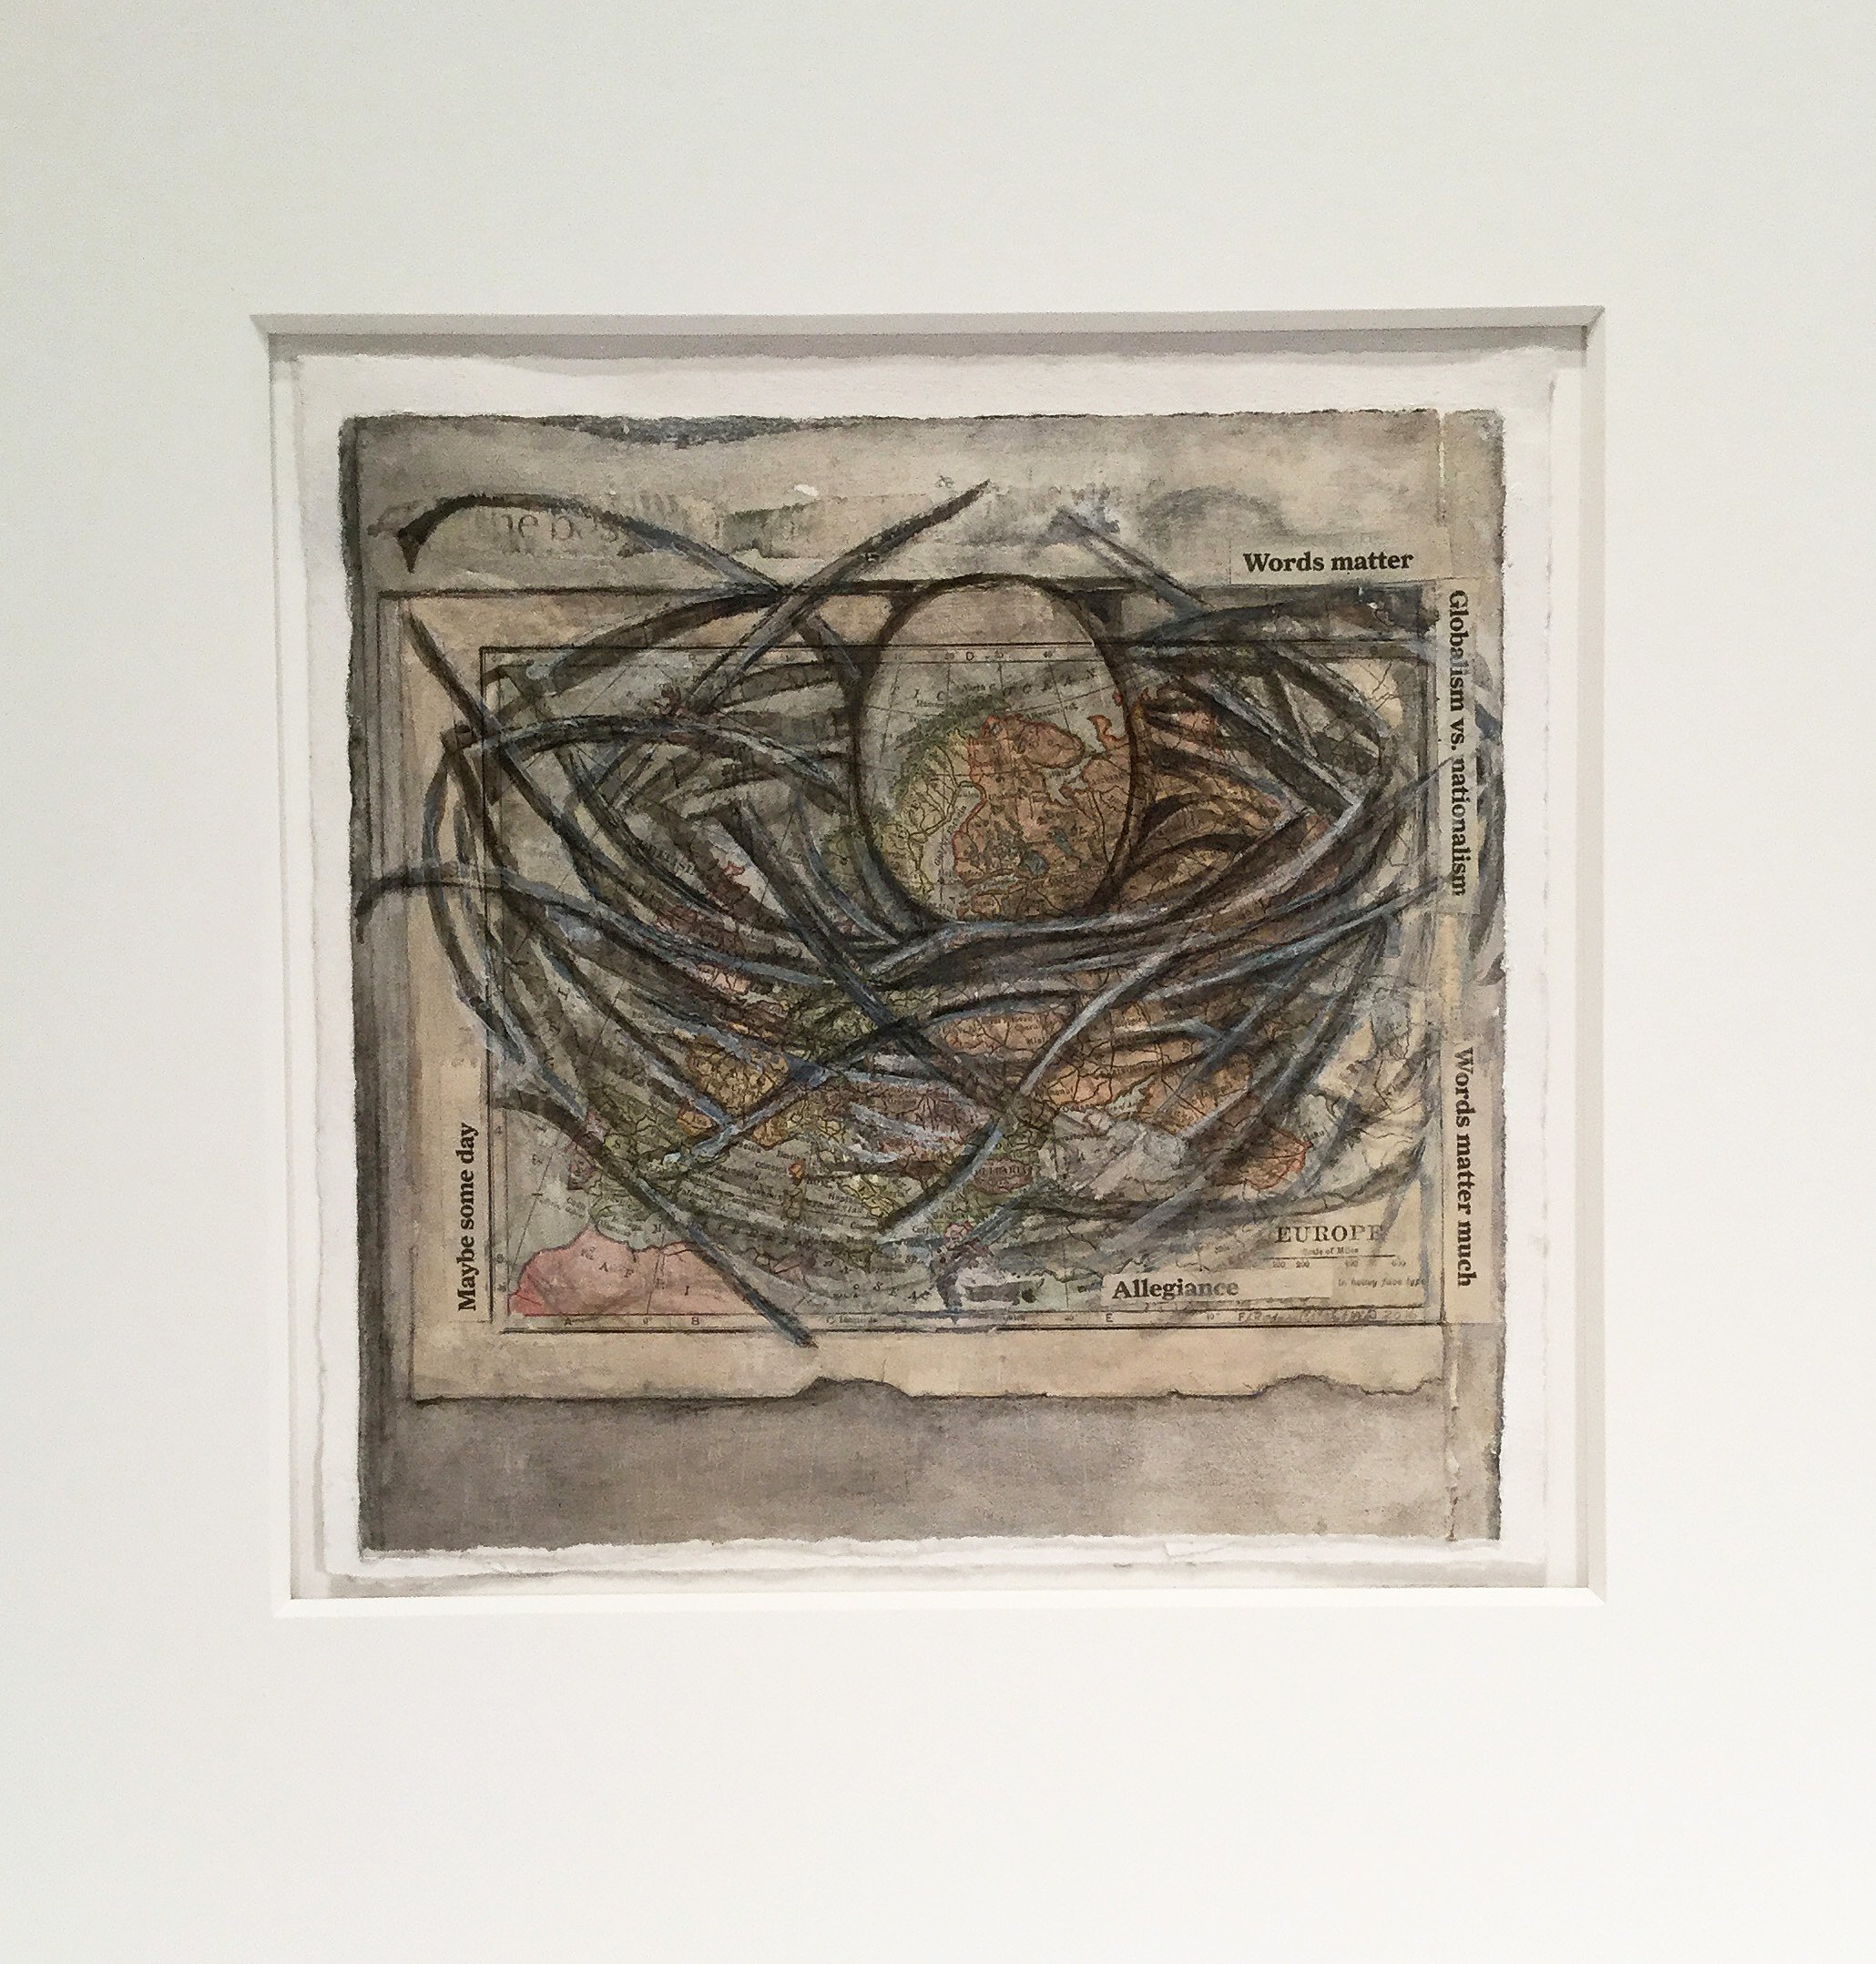 2cd(0)-Eu-roped -9x9in (image), chalks, map on paper, 2016.jpg